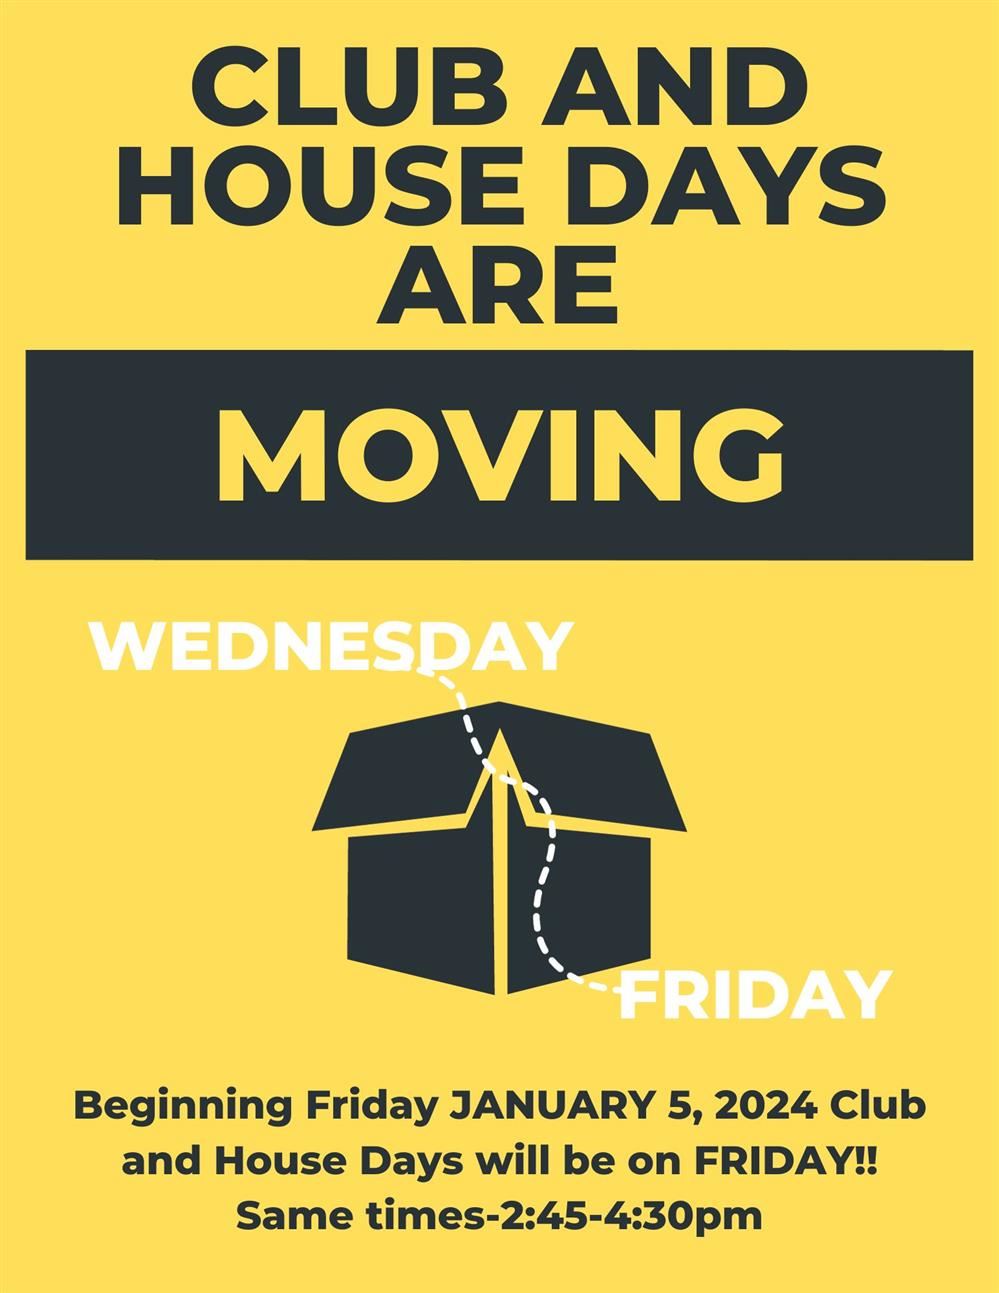  Club and House Days are MOVING